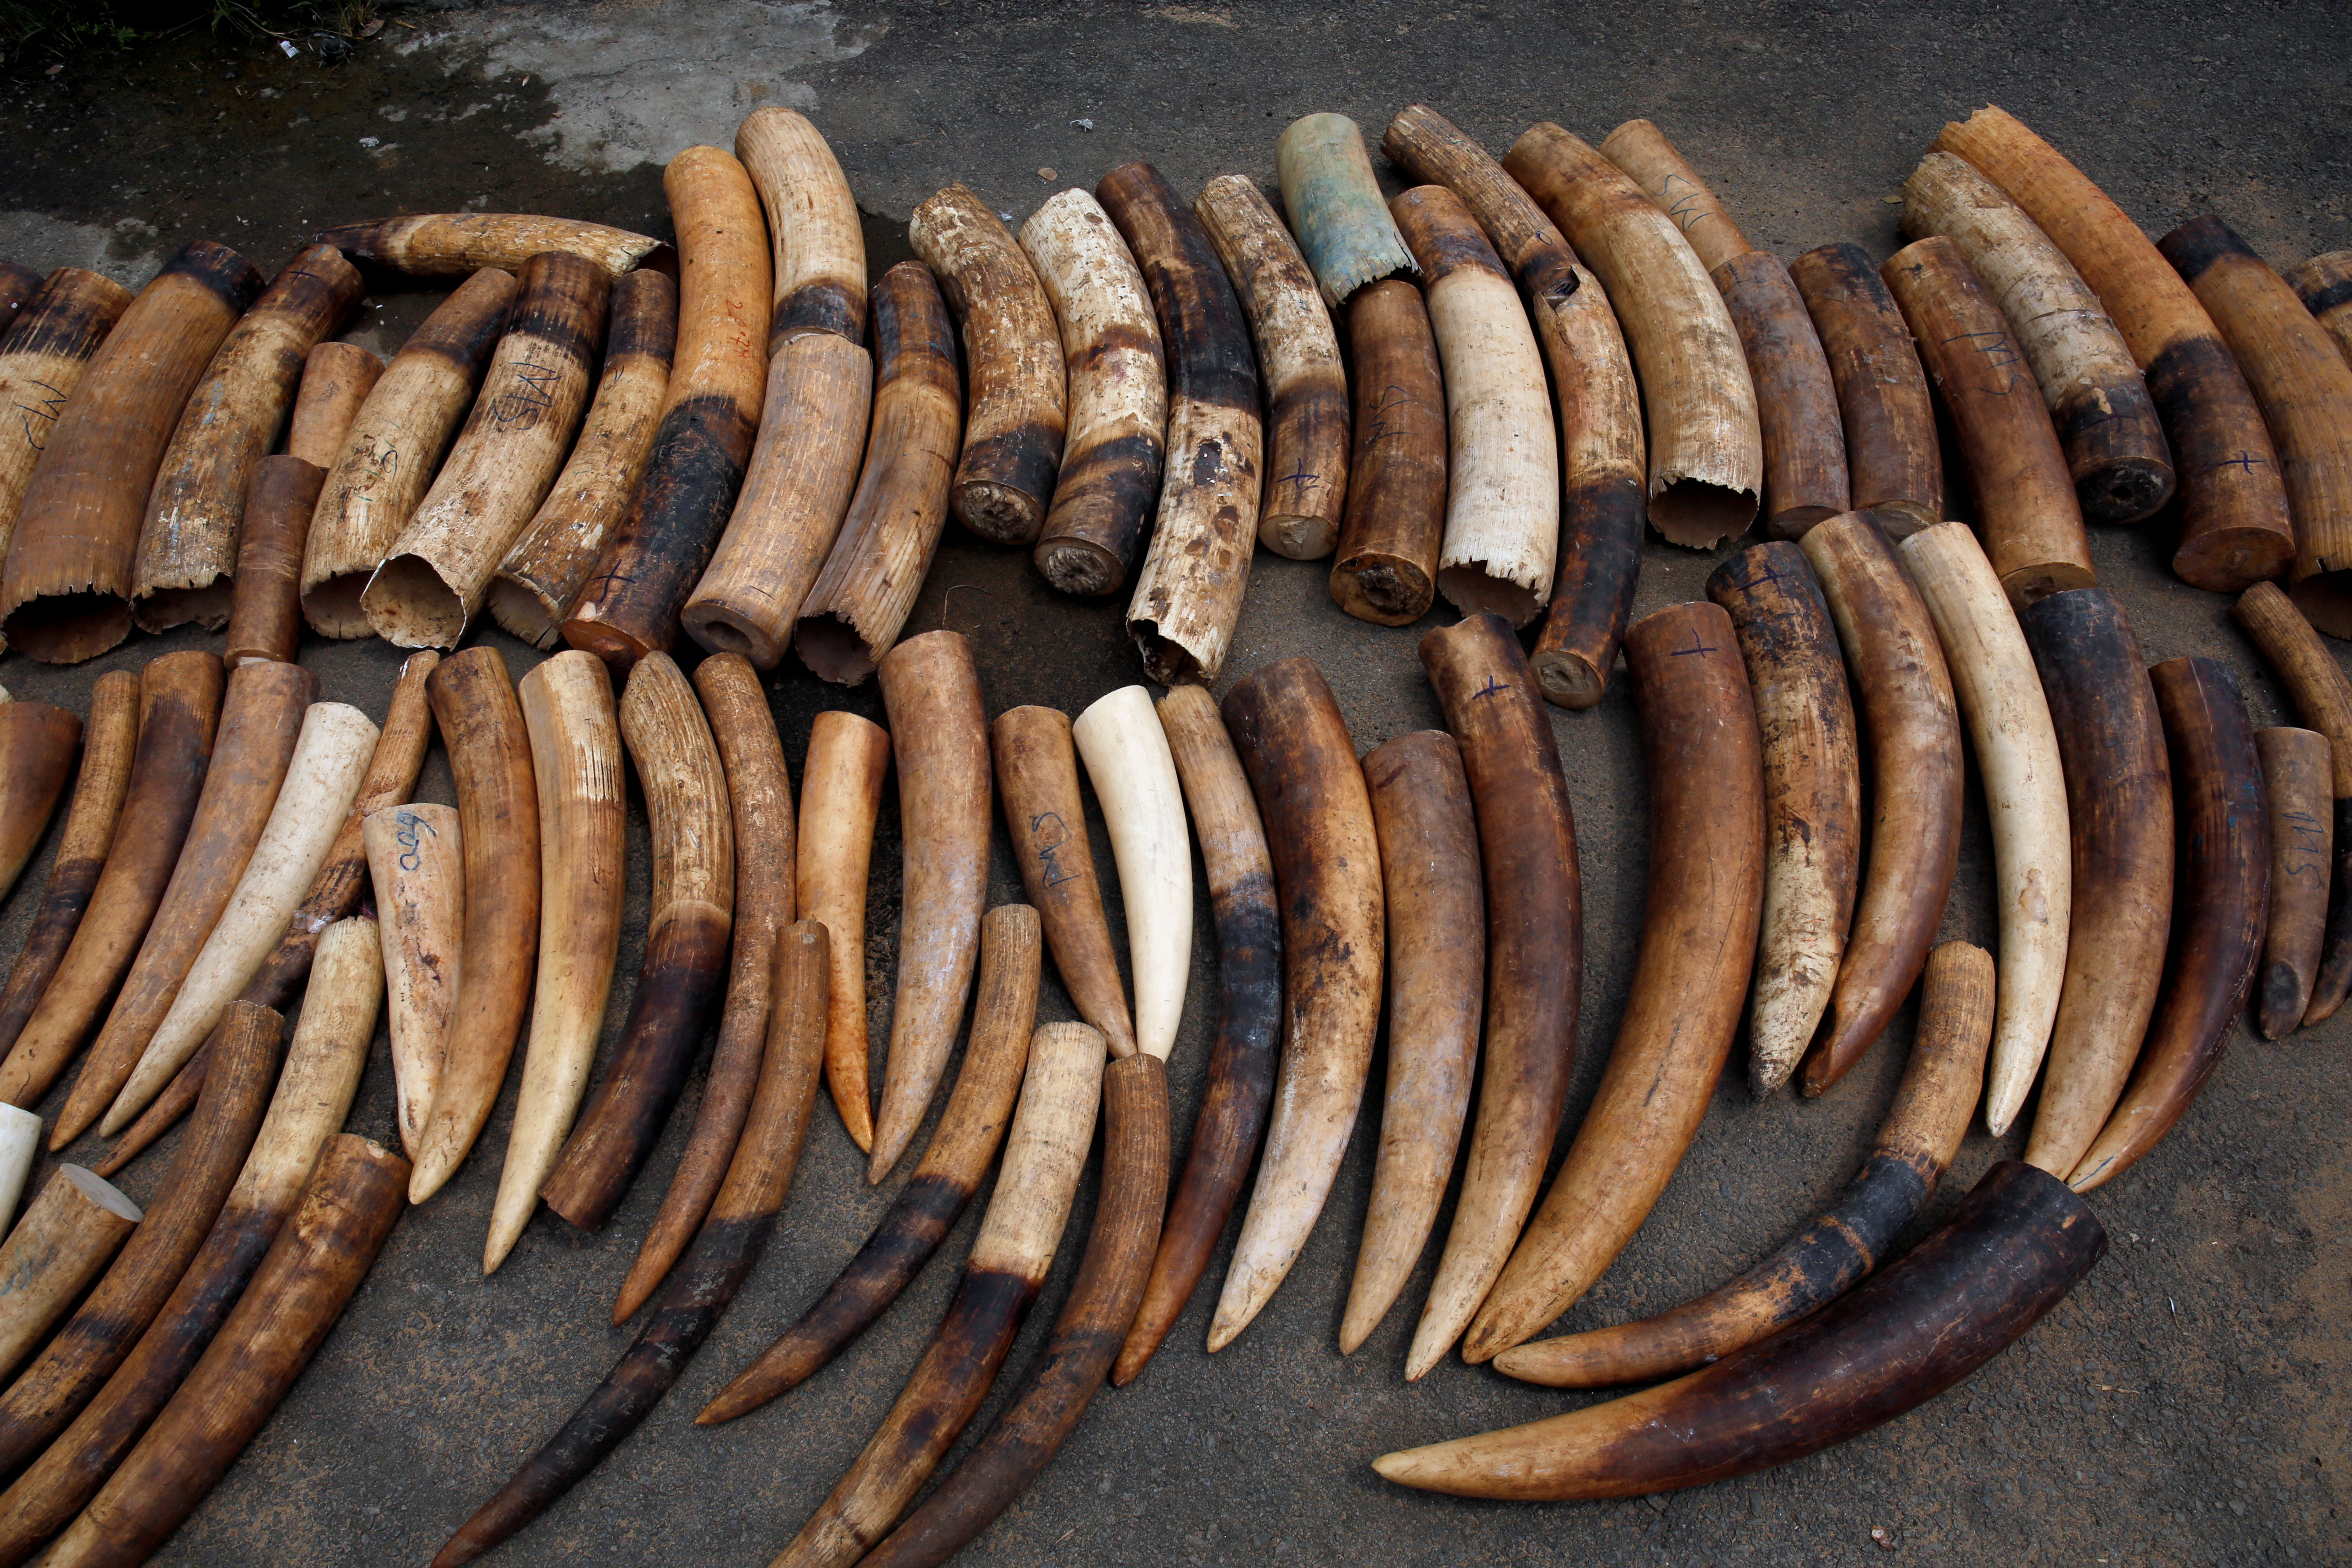 An elephant tusks batch seized from traffickers by Ivorian wildlife agents is pictured in Abidjan